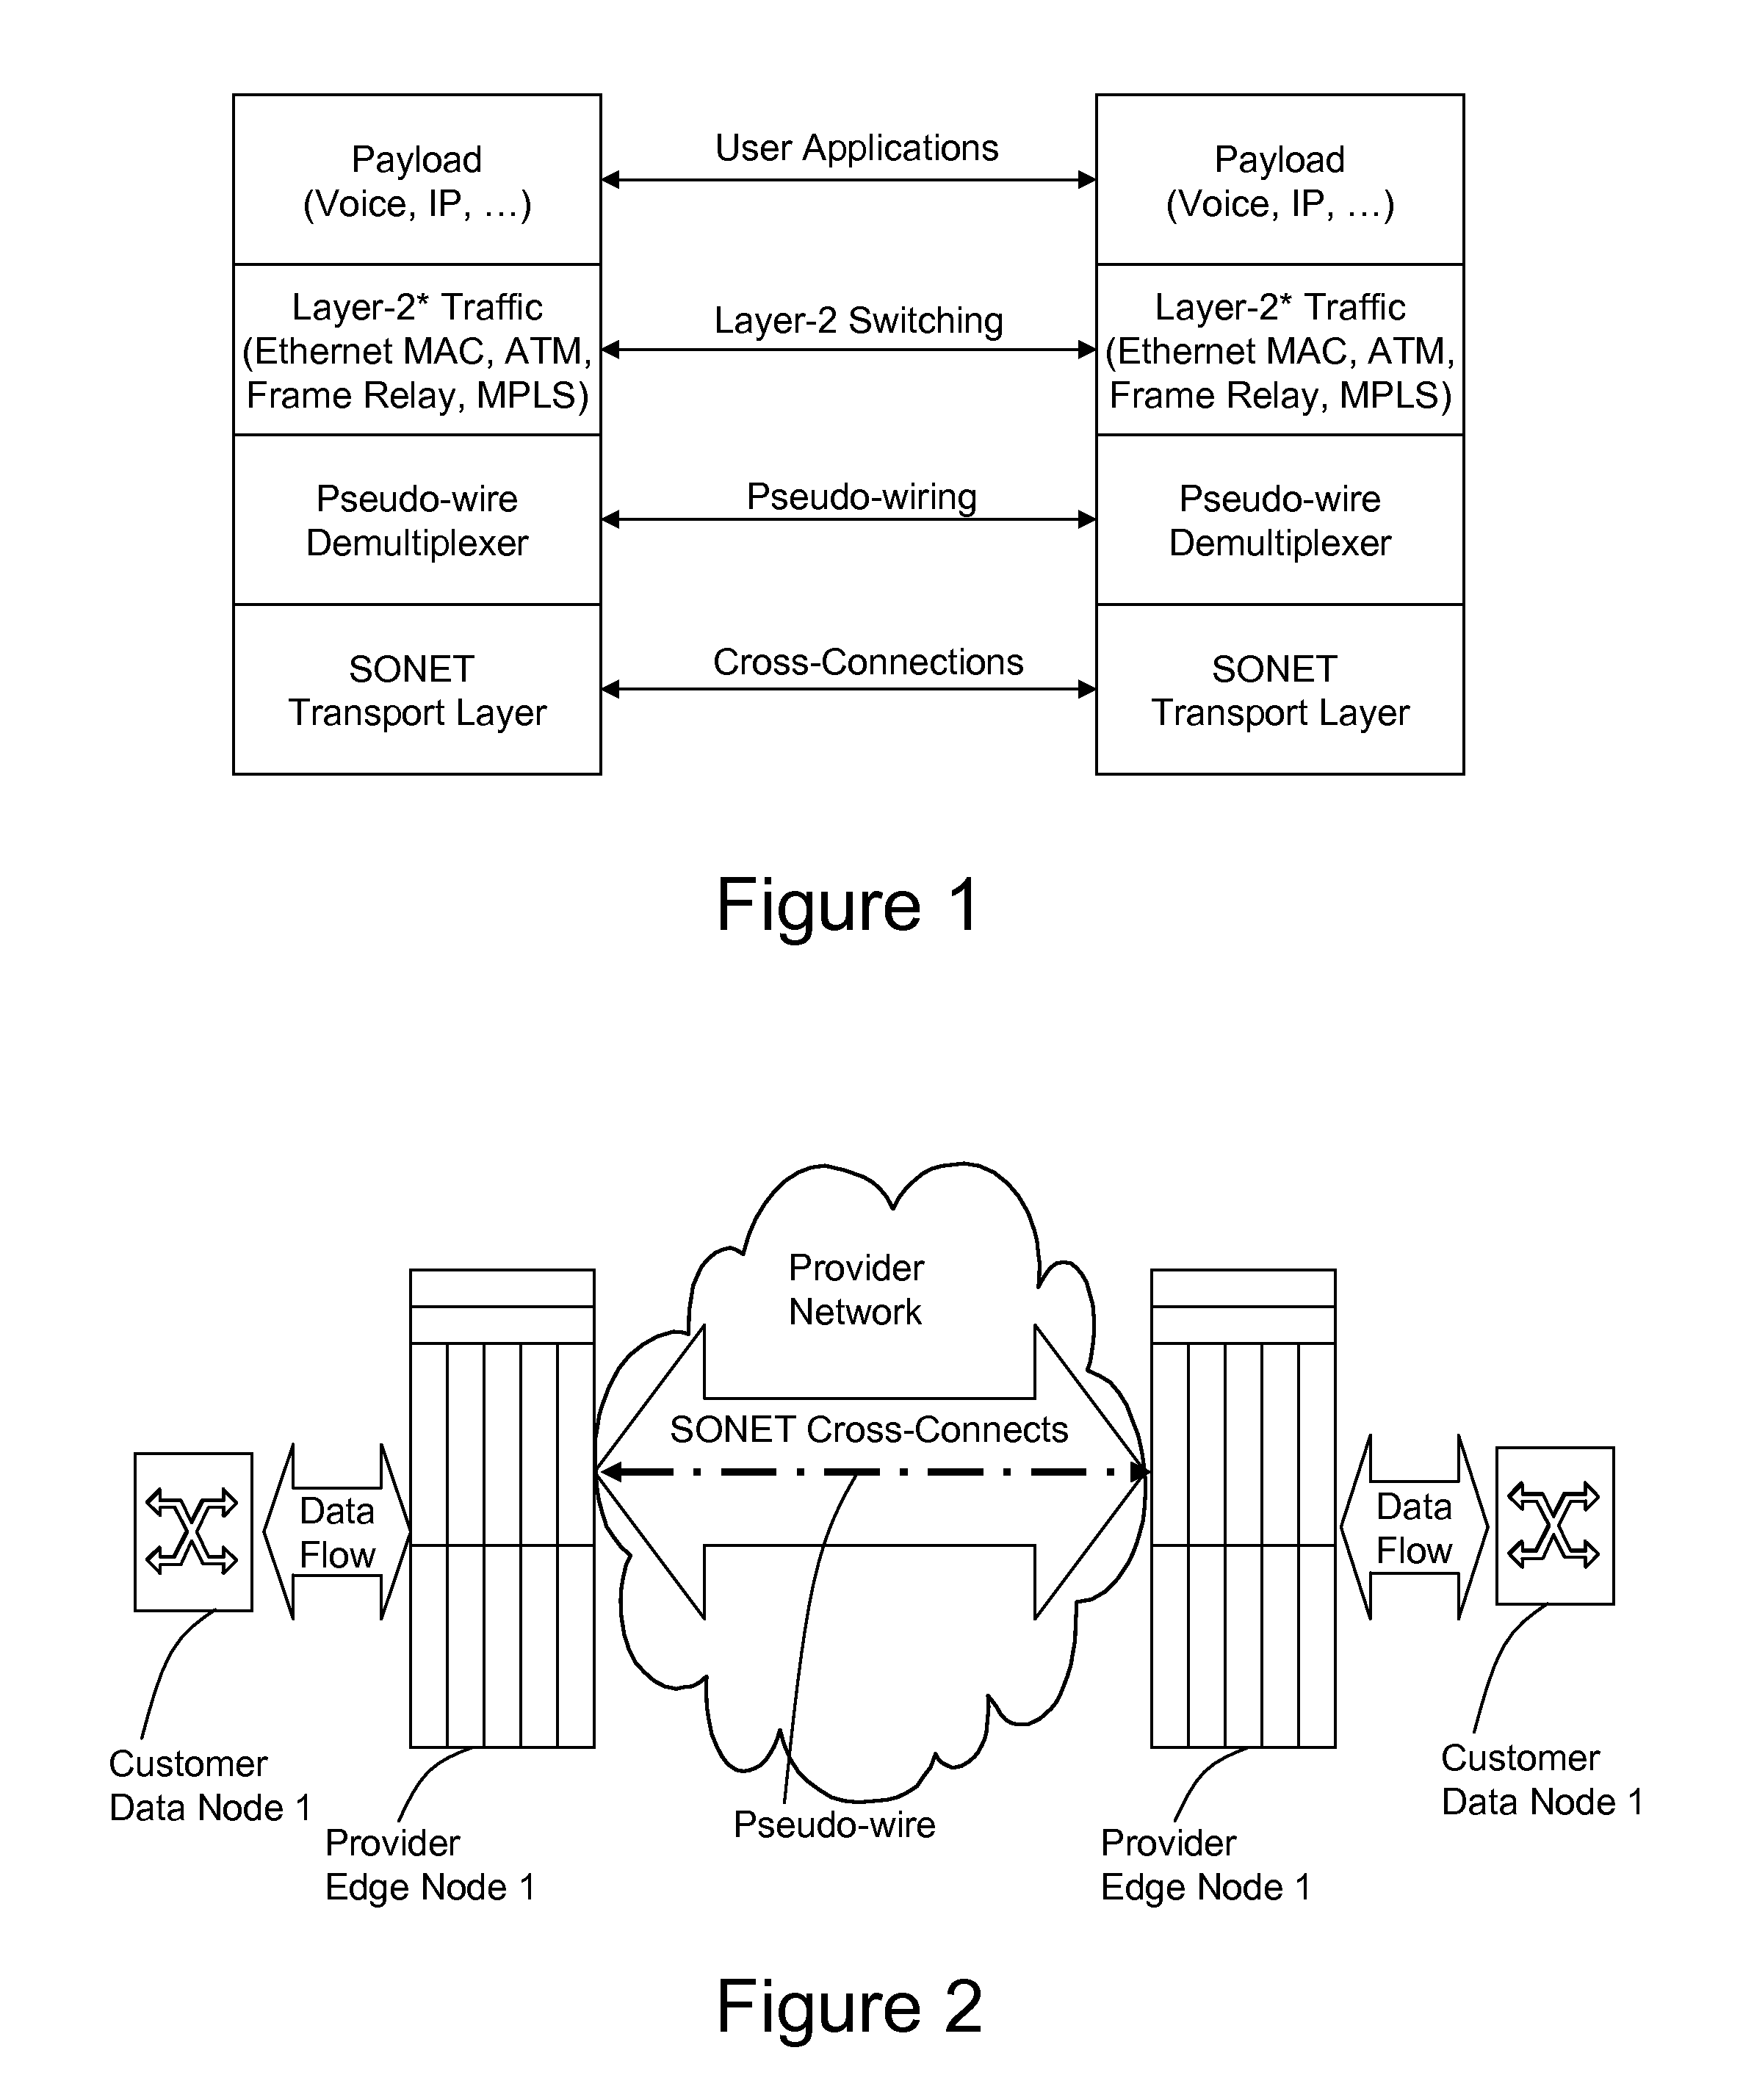 Method and apparatus for performing data flow ingress/egress admission control in a provider network